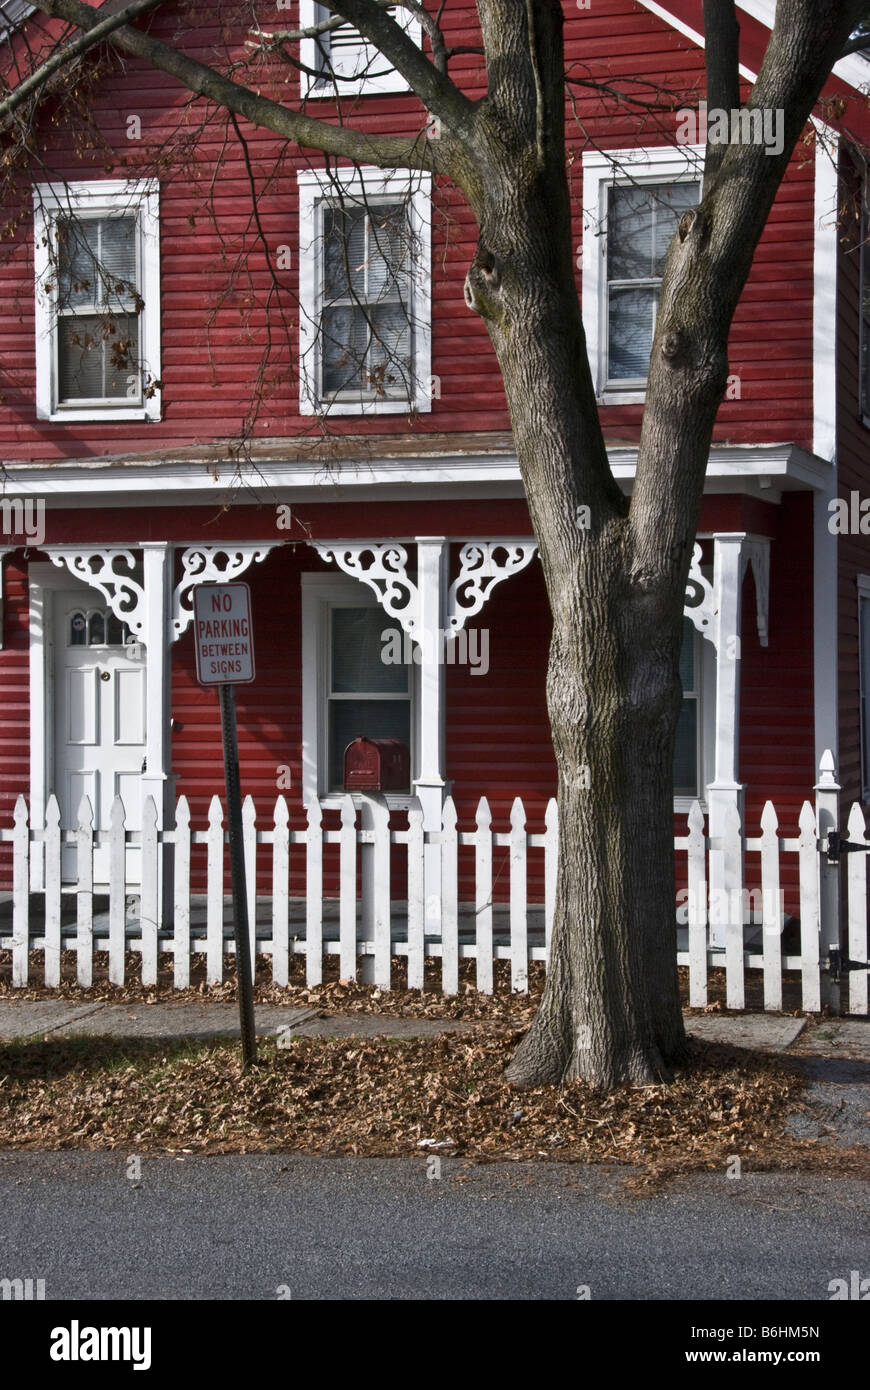 red-painted Victorian house housefront with white trim, fretwork detailing on front porch post brackets & white picket fence Stock Photo